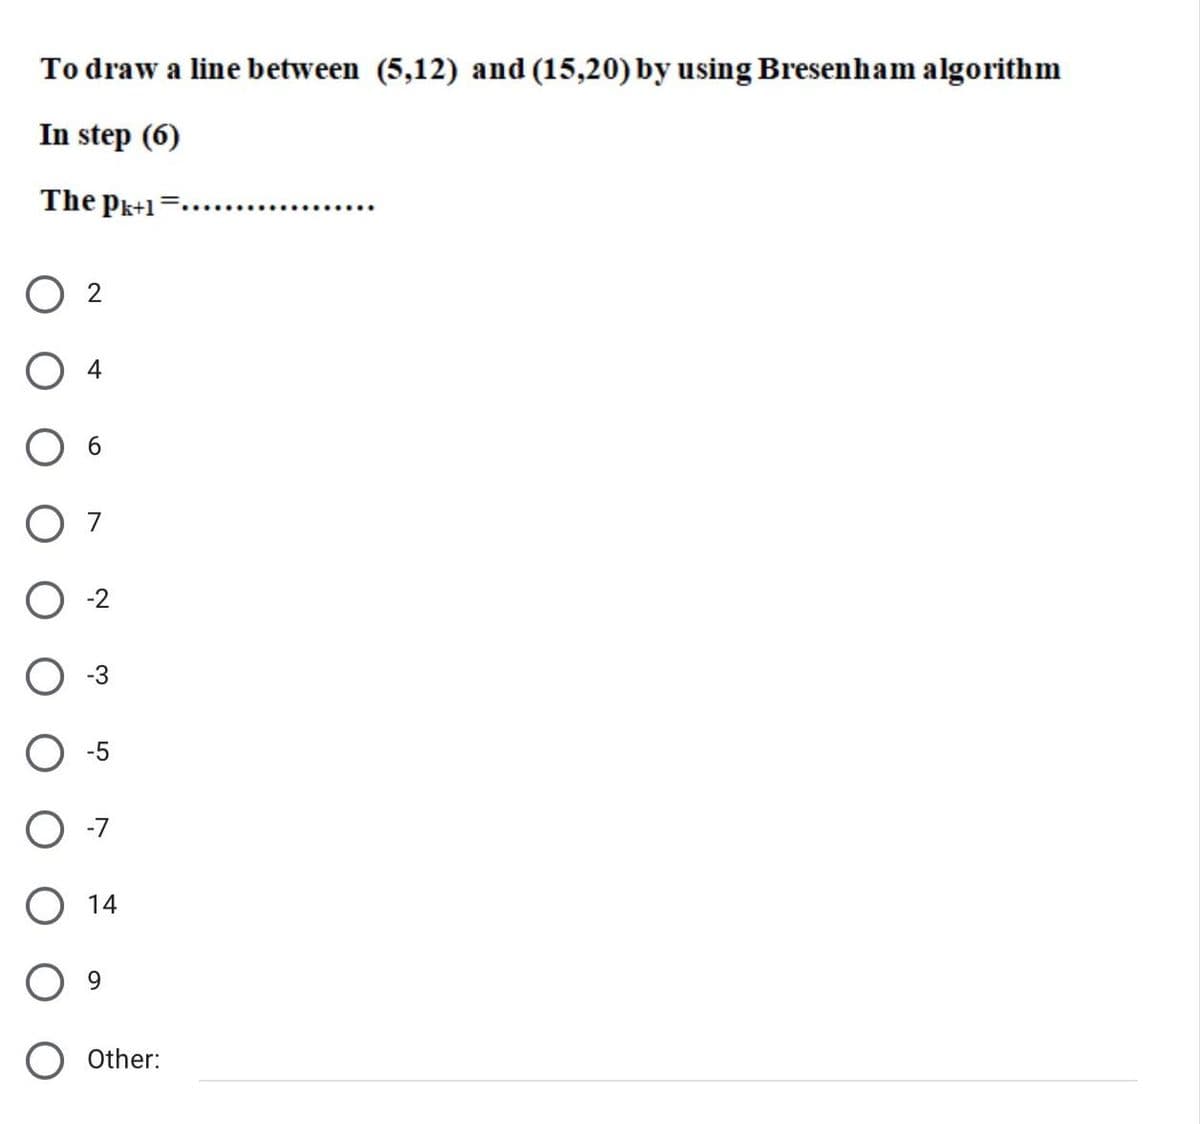 To draw a line between (5,12) and (15,20) by using Bresenham algorithm
In step (6)
The Pk+1
4
6.
7
-2
-5
O -7
O 14
Other:
